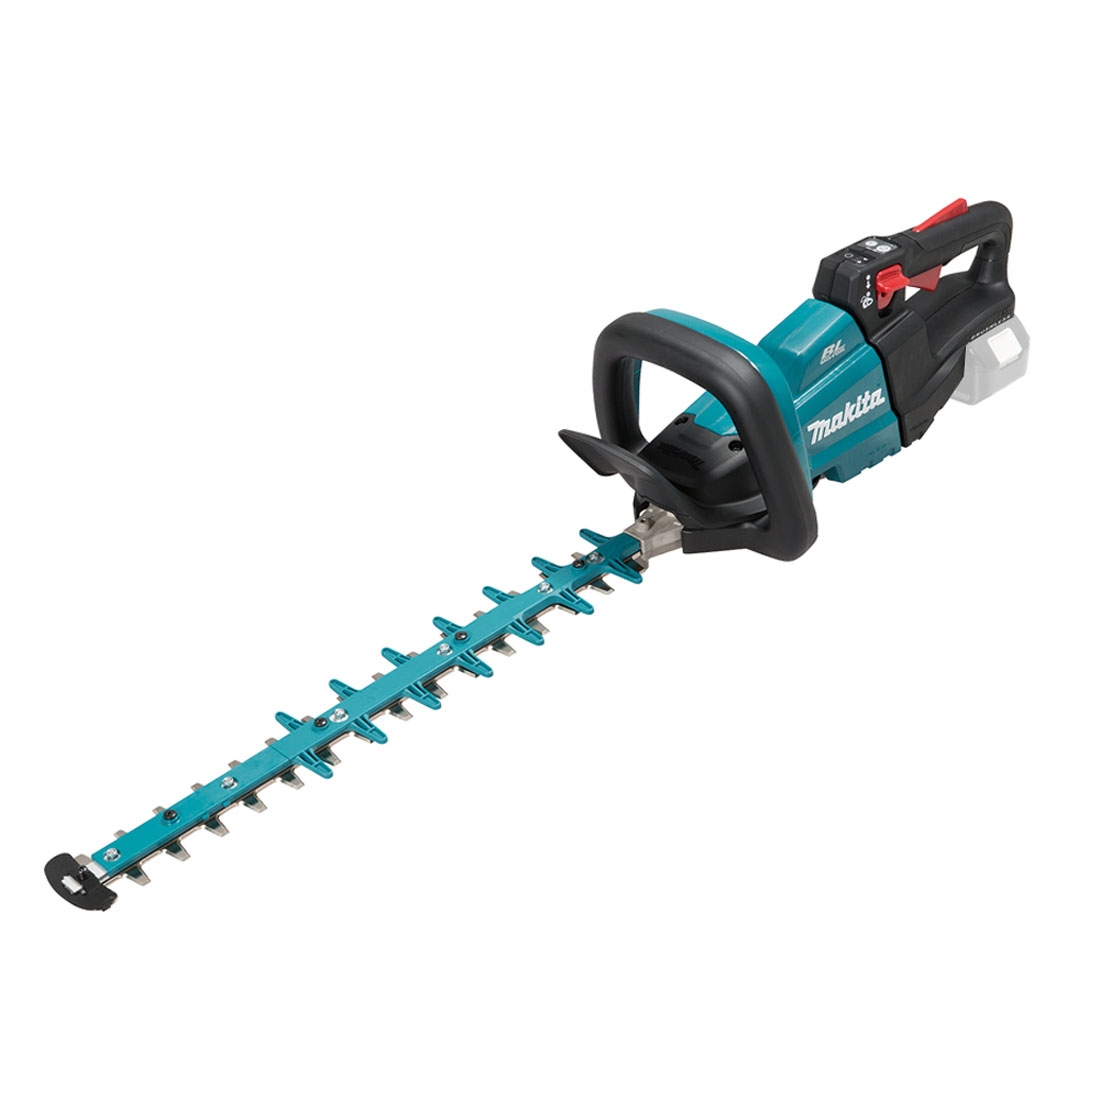 Makita UH522DZ Hedge Trimmer No Batteries Included 